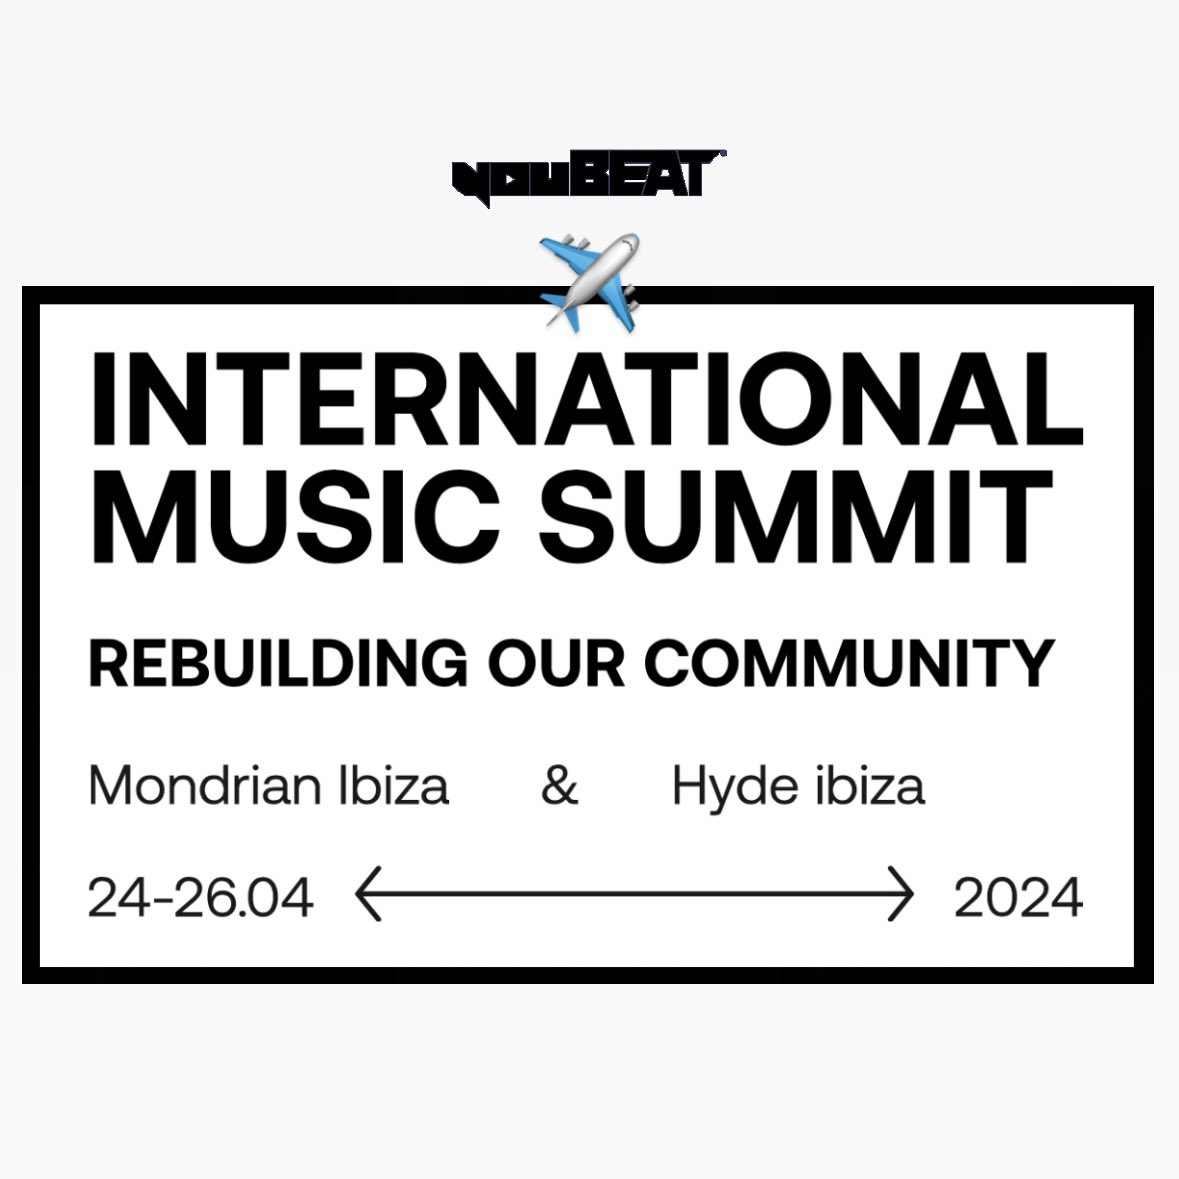 For the 3rd year in a row, we’ll attend and cover ##IMSIbiza and the clubs openings as media! 🔊

Looking forward to this 15th edition “#RebuildingOurCommunity”, from 24th to 26th April at new venues Mondrian & Hyde resorts in #CalaLlonga! 🏝️
➡️ youbeat.it/en/internation…

#youBeat